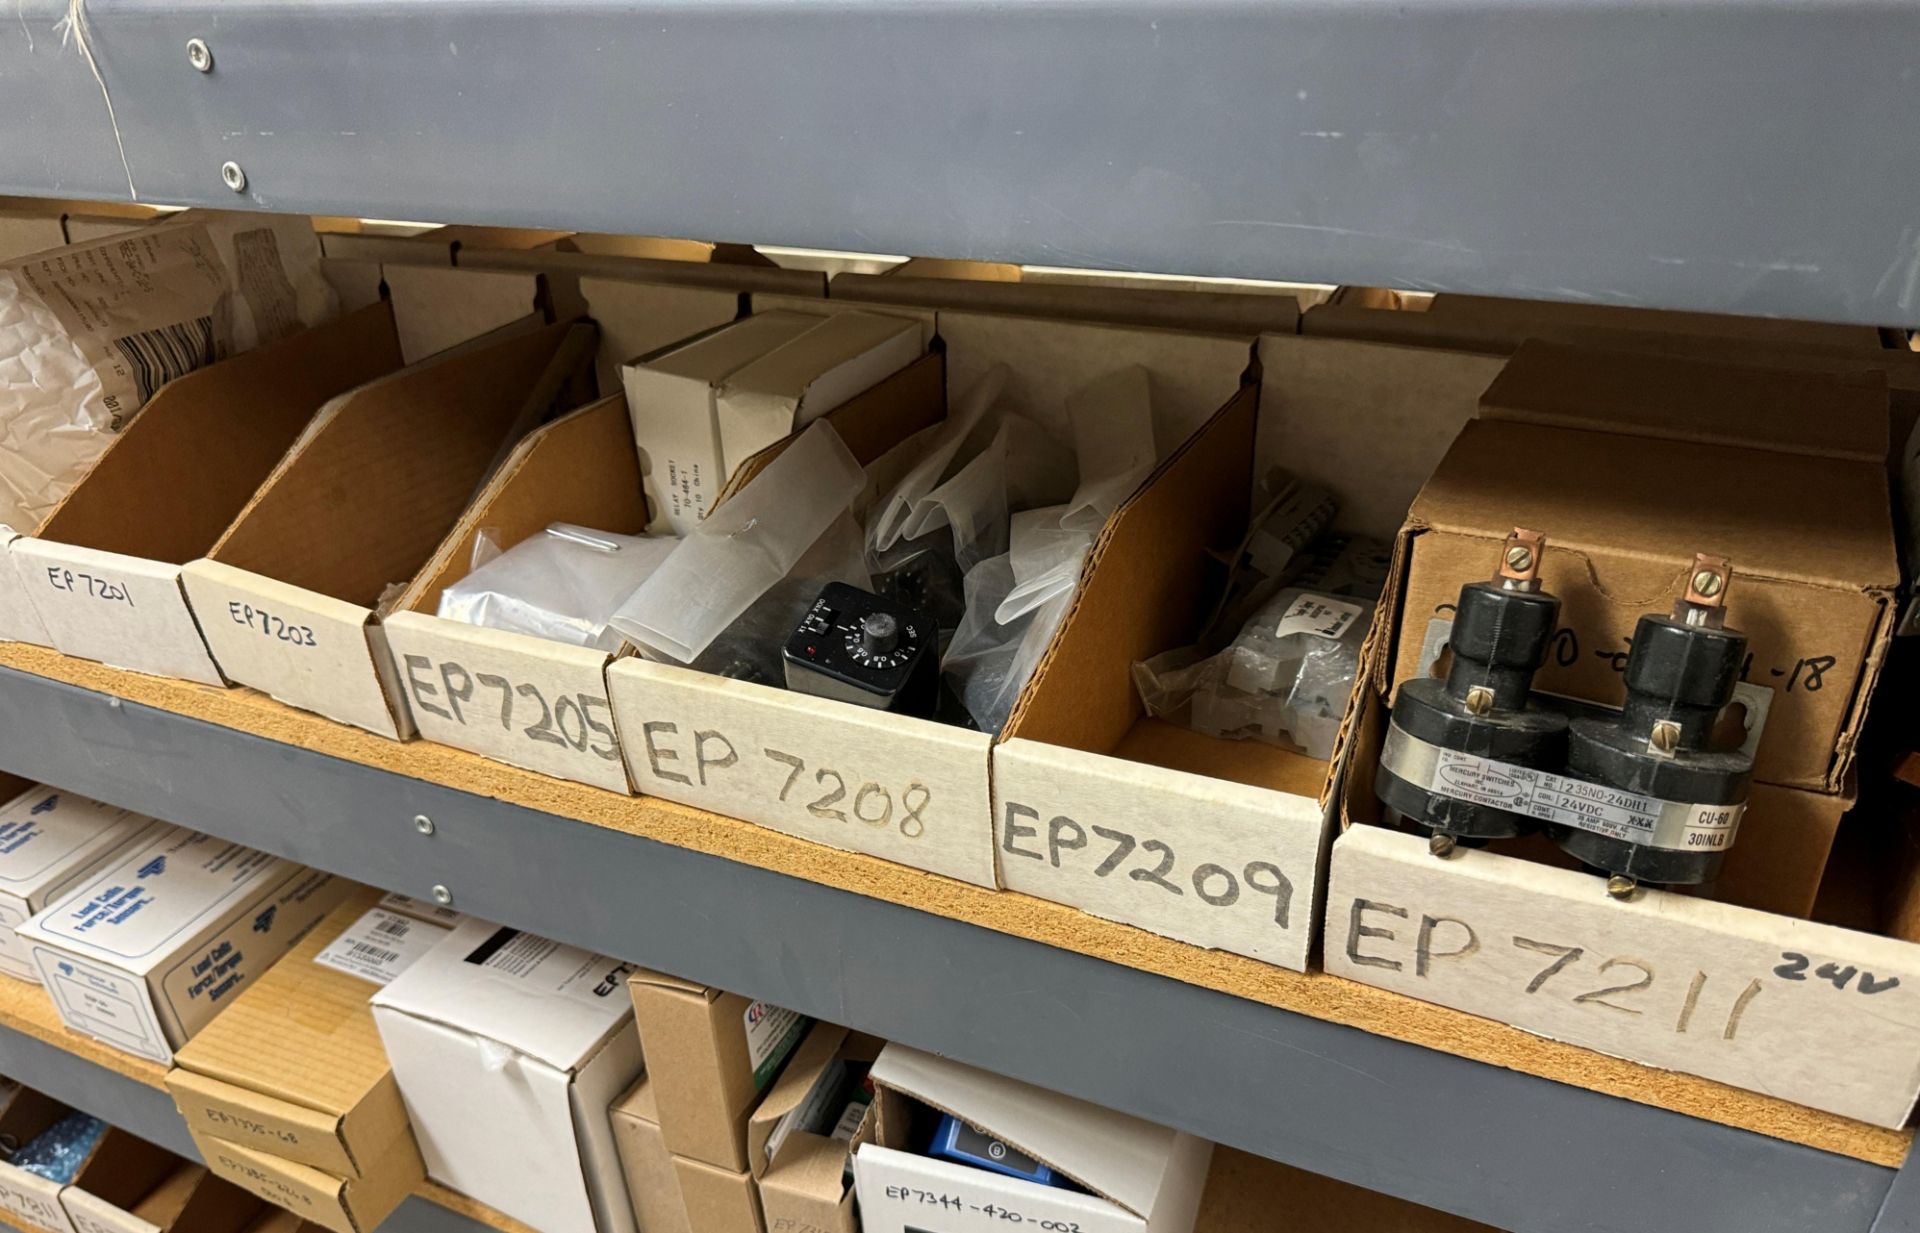 LOT - CONTENTS ONLY OF (1) SHELF, TO INCLUDE: MERCURY CONTACTORS, POWER SUPPLIES, LOAD CELLS,